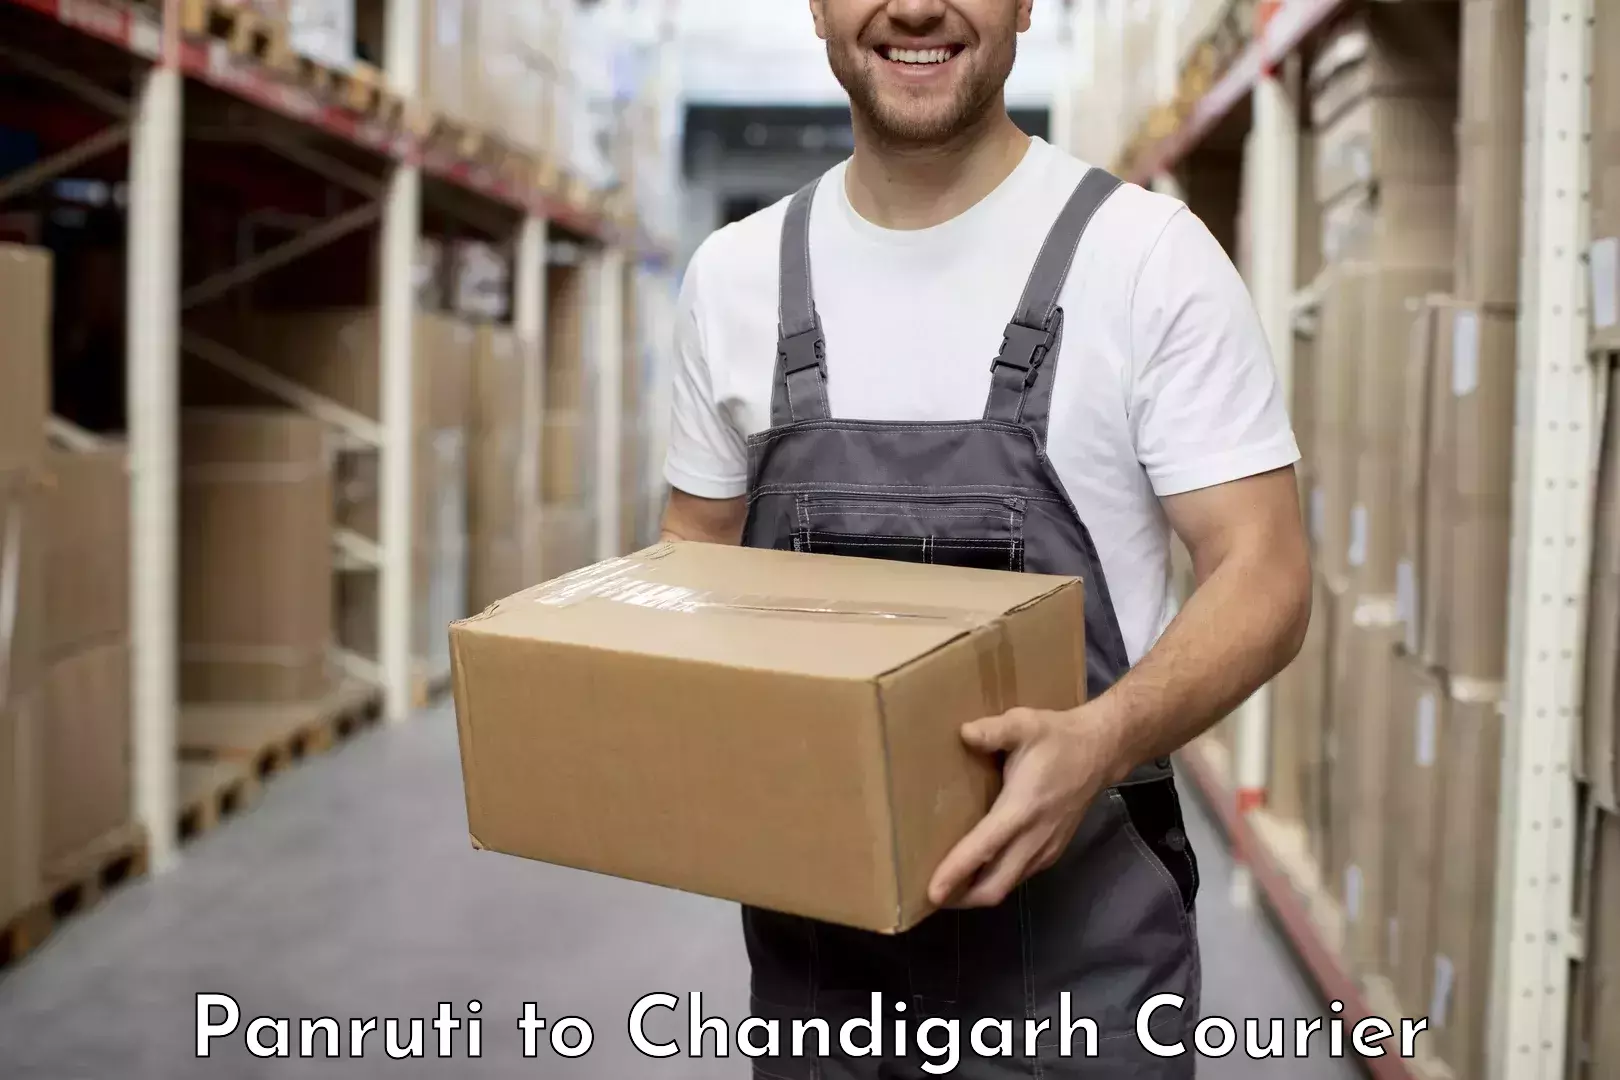 Fast delivery service Panruti to Chandigarh